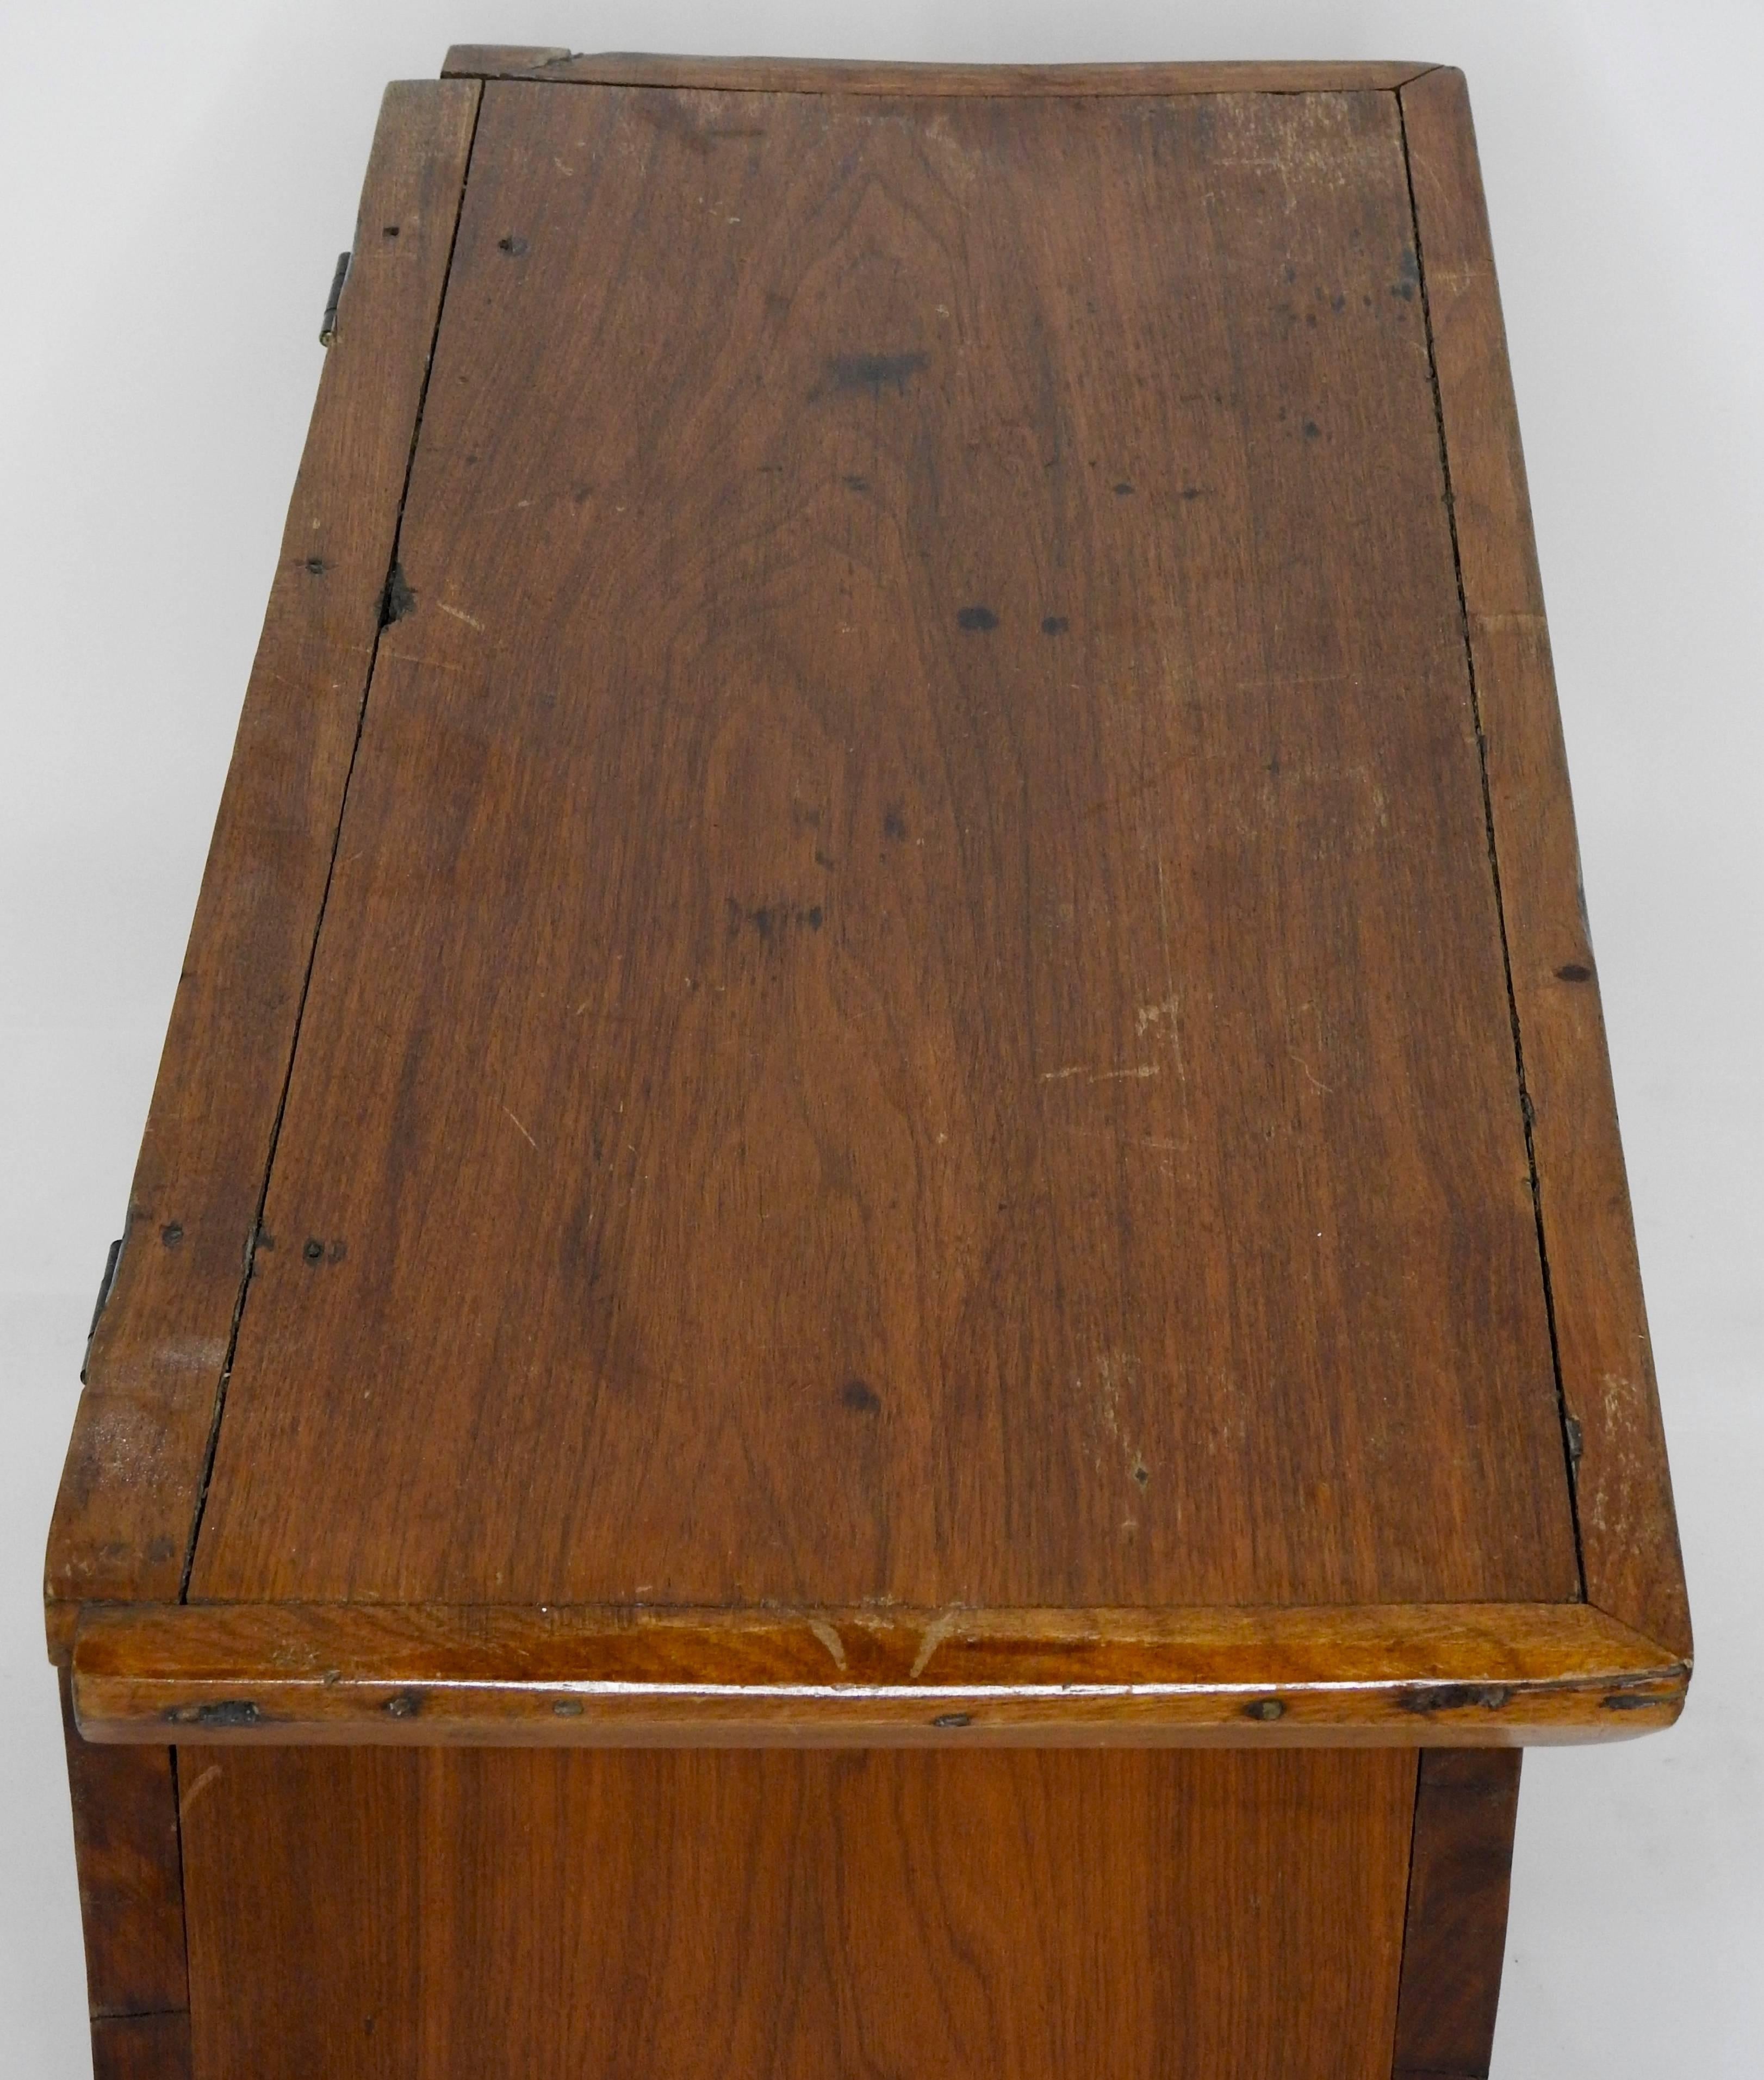 Wood Walnut Sugar Chest with Lift Top, Early 19th Century For Sale